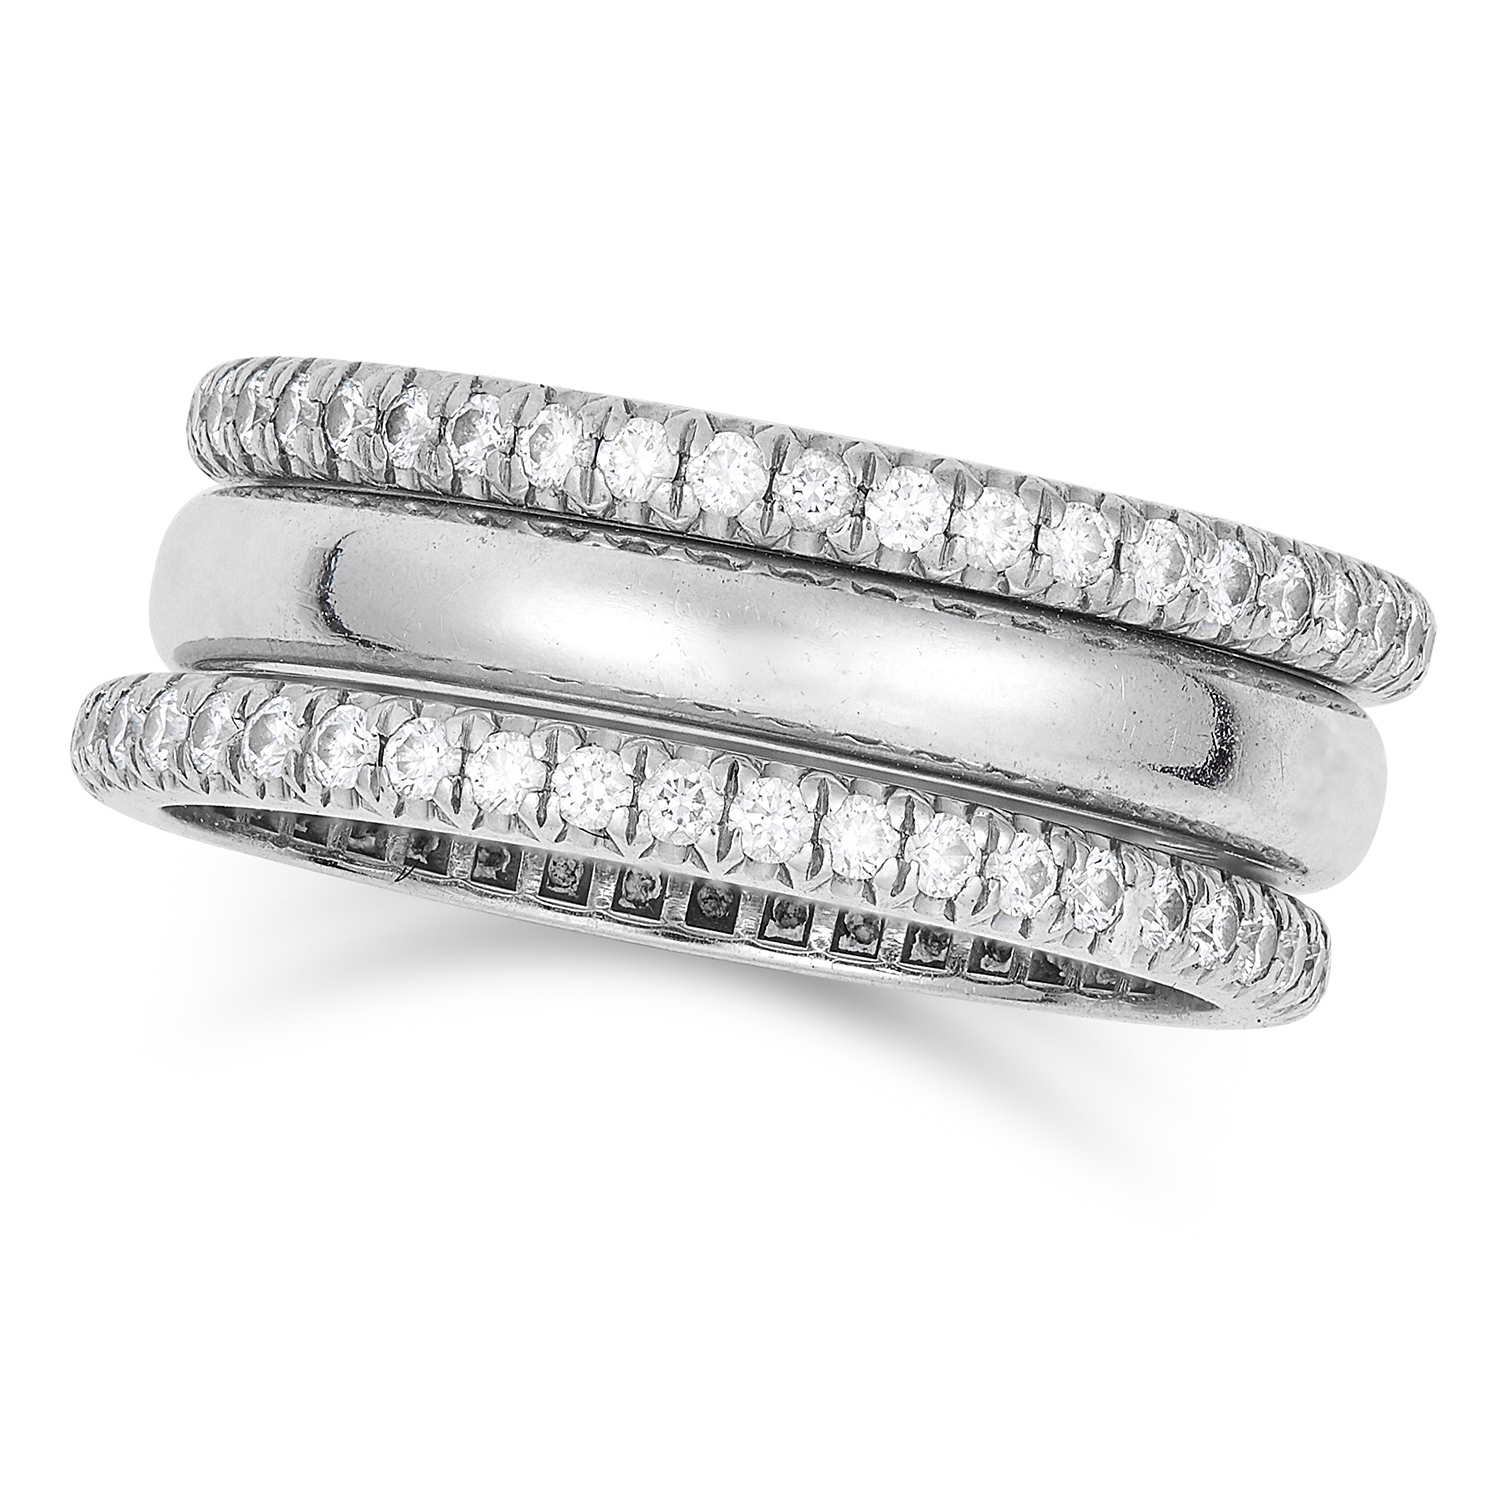 DIAMOND RING SET, TIFFANY in platinum, comprising of two round cut diamond eternity bands and one